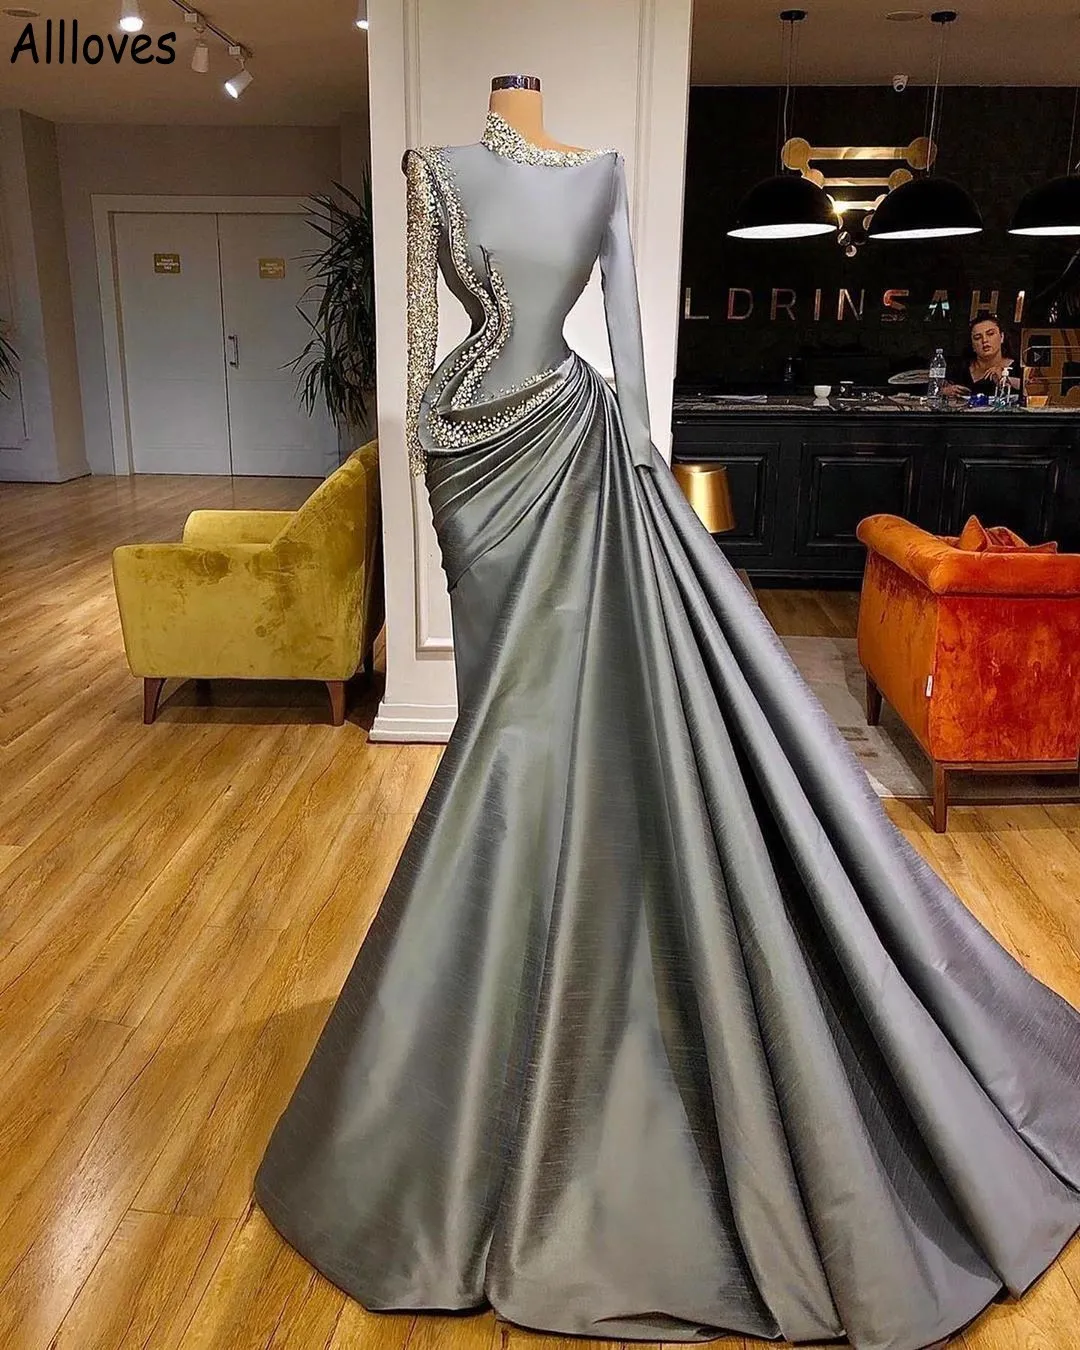 Silver Sequined Asymmetry Neck Evening Dresses For Women Dubai Arabic One Shoulder Long Sleeves Prom Party Gowns Formal Ruched Long Skirt Vestidos De Festa CL1743